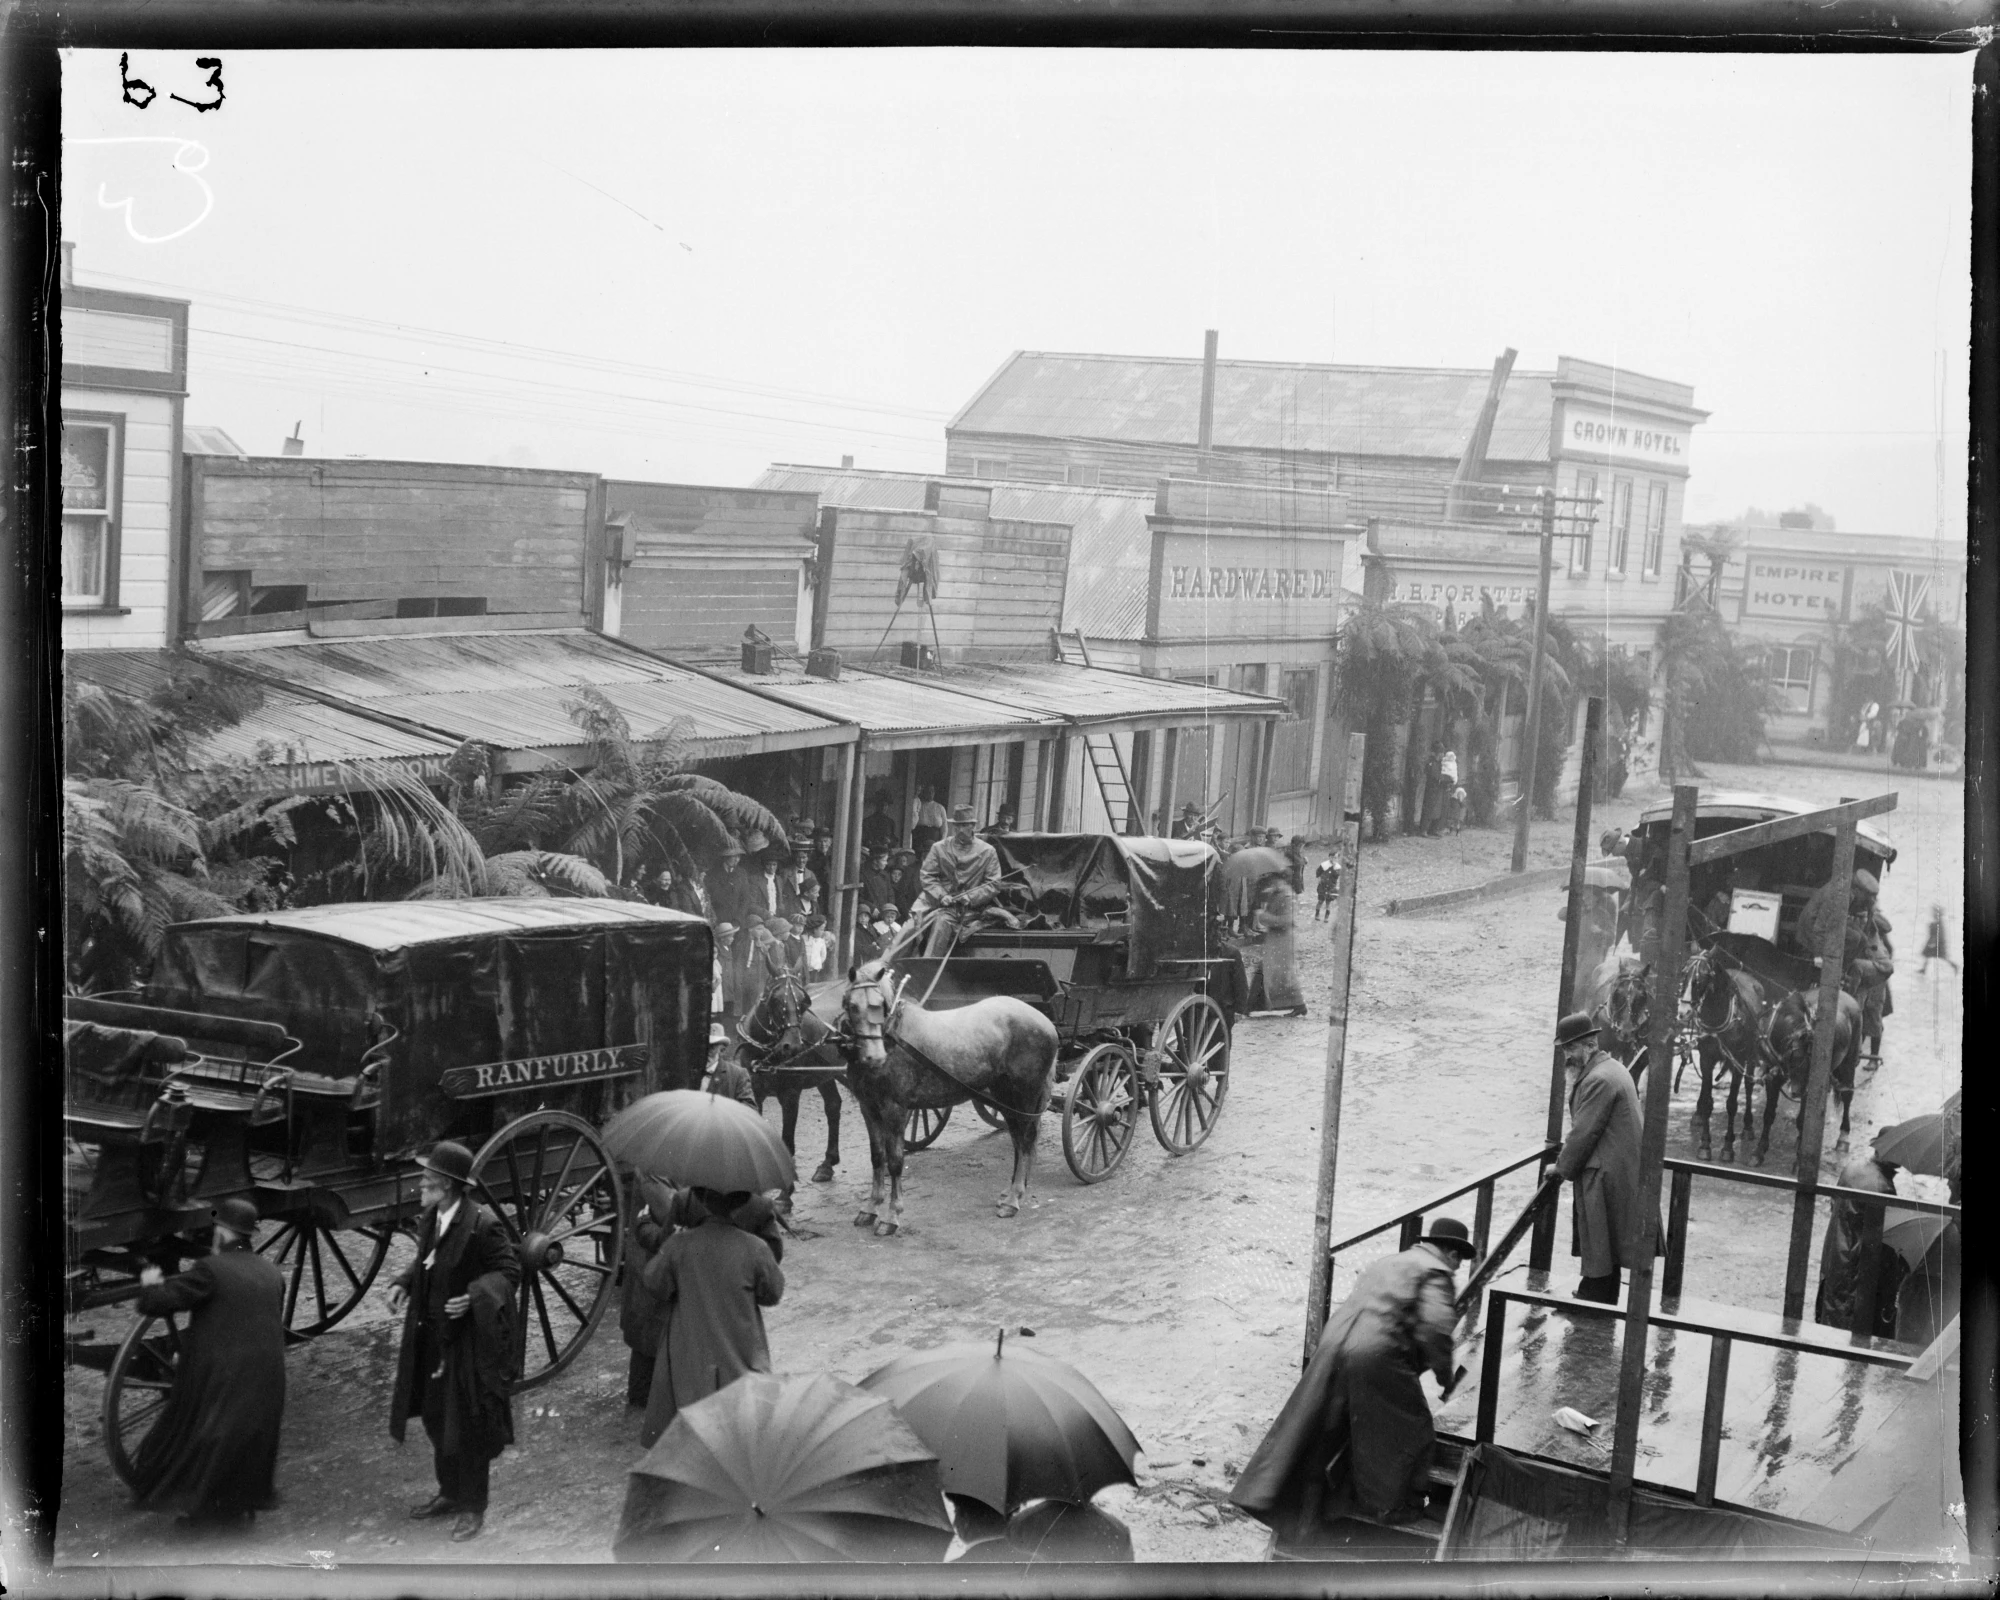 A rain-soaked street scene with horses and buggies waiting to pick up passengers and other pedestrians hurrying to shelter and carrying umbrellas.